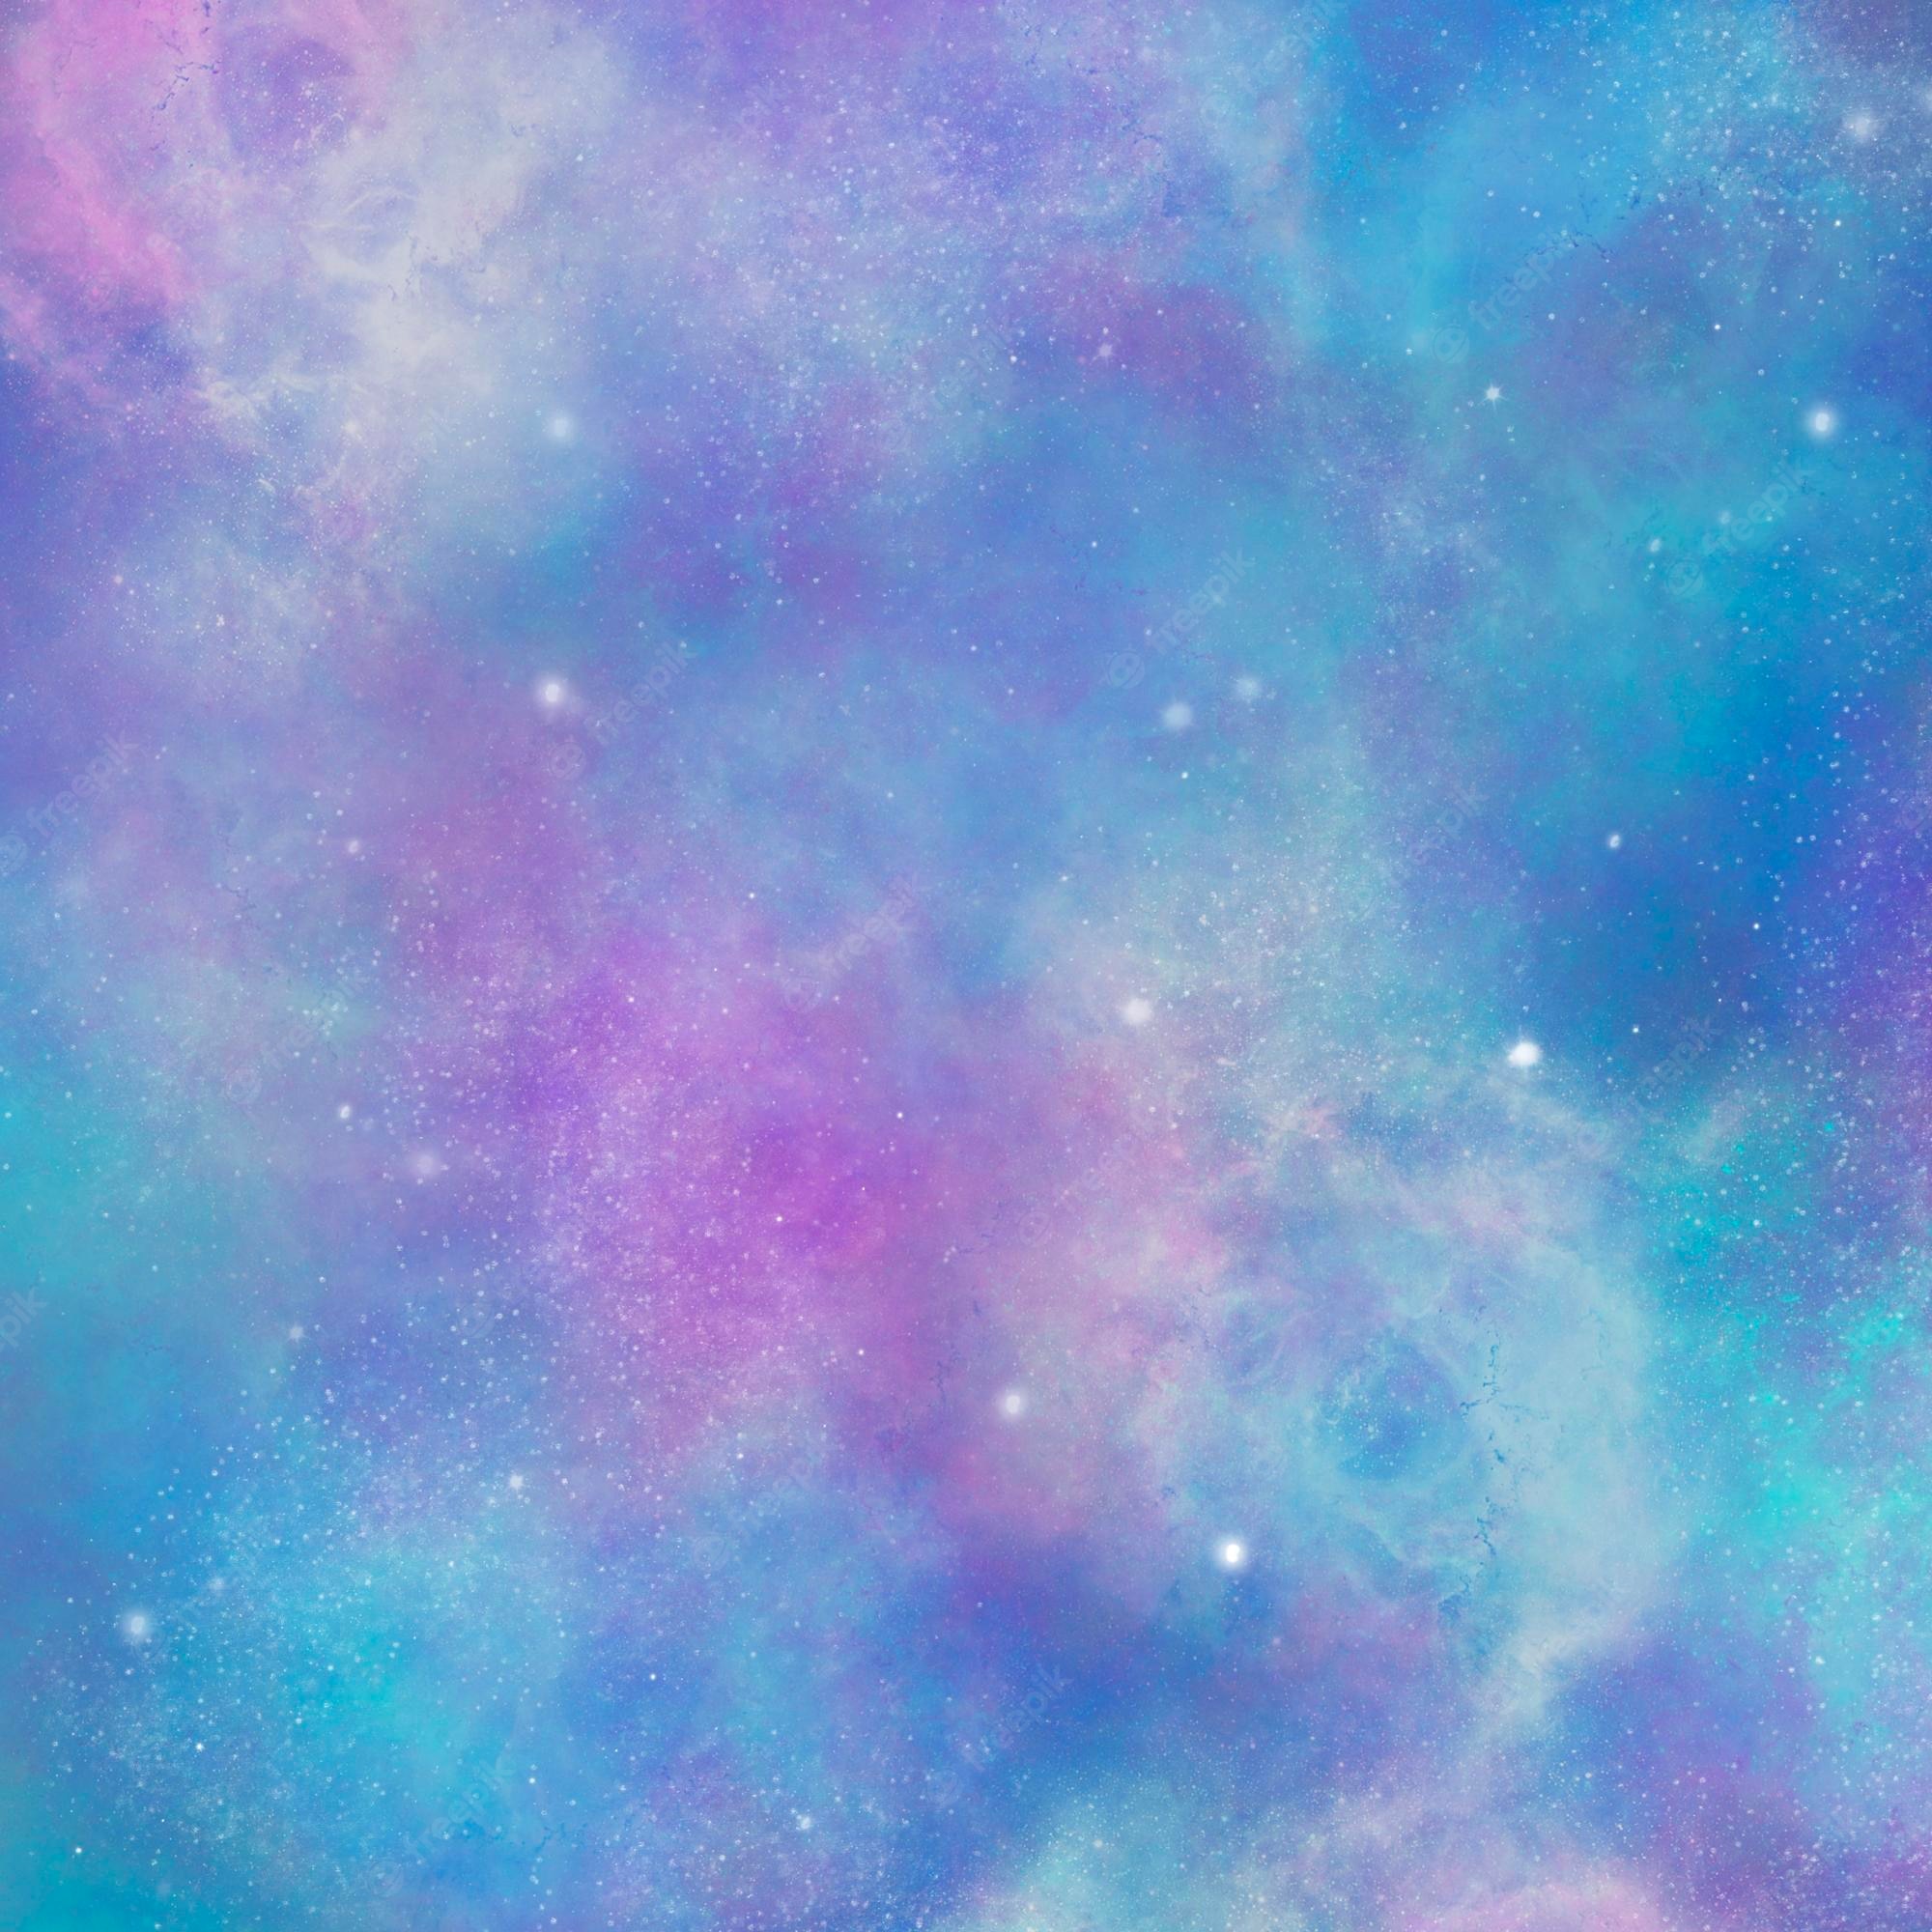 Premium Photo. Blue galaxy background space and stars as wallpaper, poster or cover multicolored universe pattern